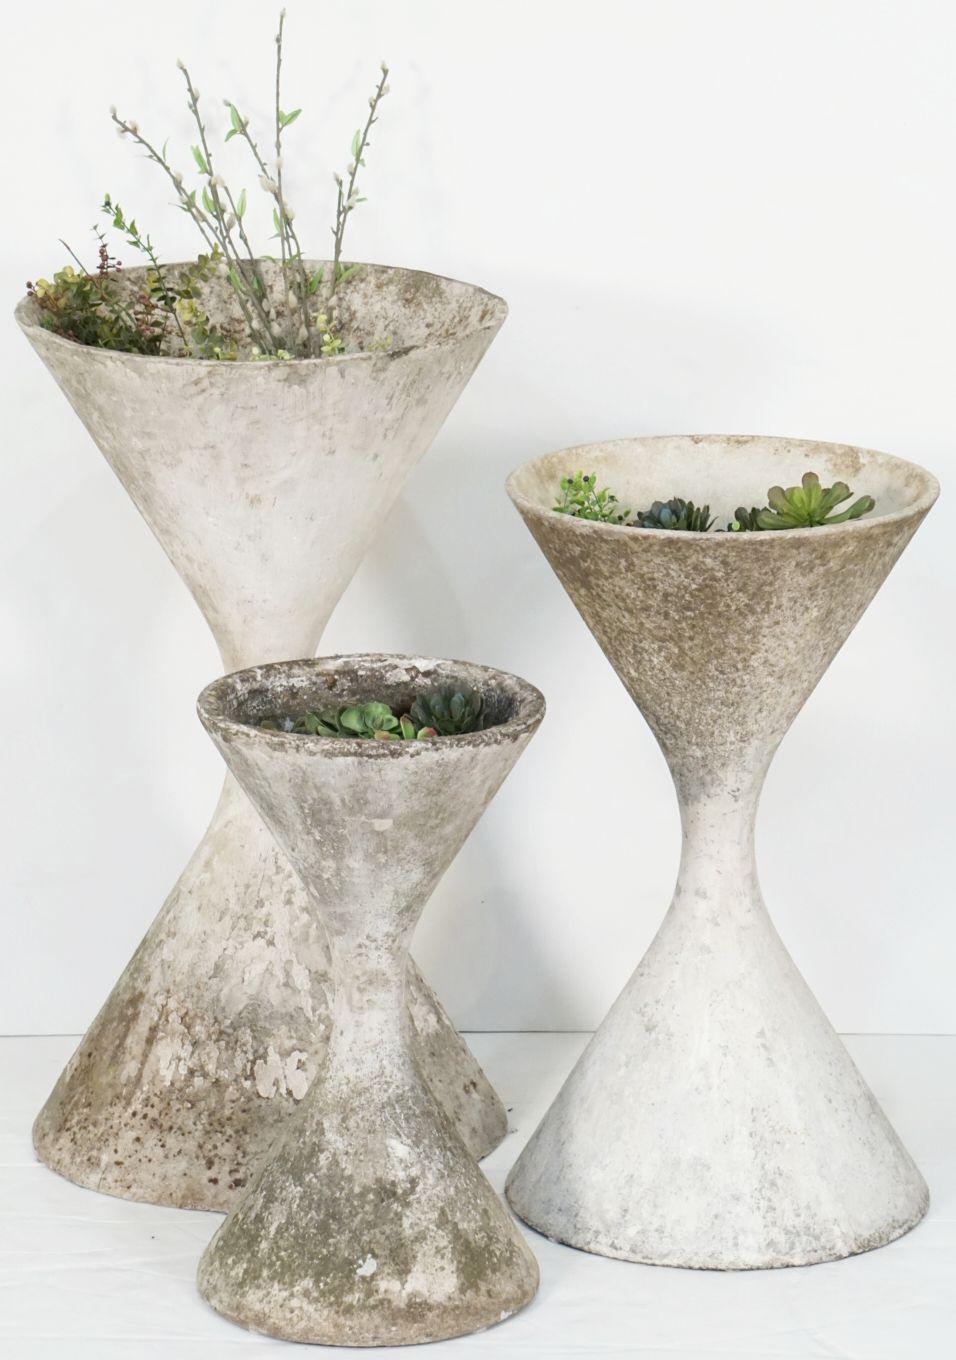 A fine trio of Mid-Century Modern hour-glass shaped spindel planter pots or urns of composition cement - in varying heights - for an indoor or outdoor garden, garden room, or terrace - designed by the iconic Swiss designer, Willy Guhl. 

Swiss